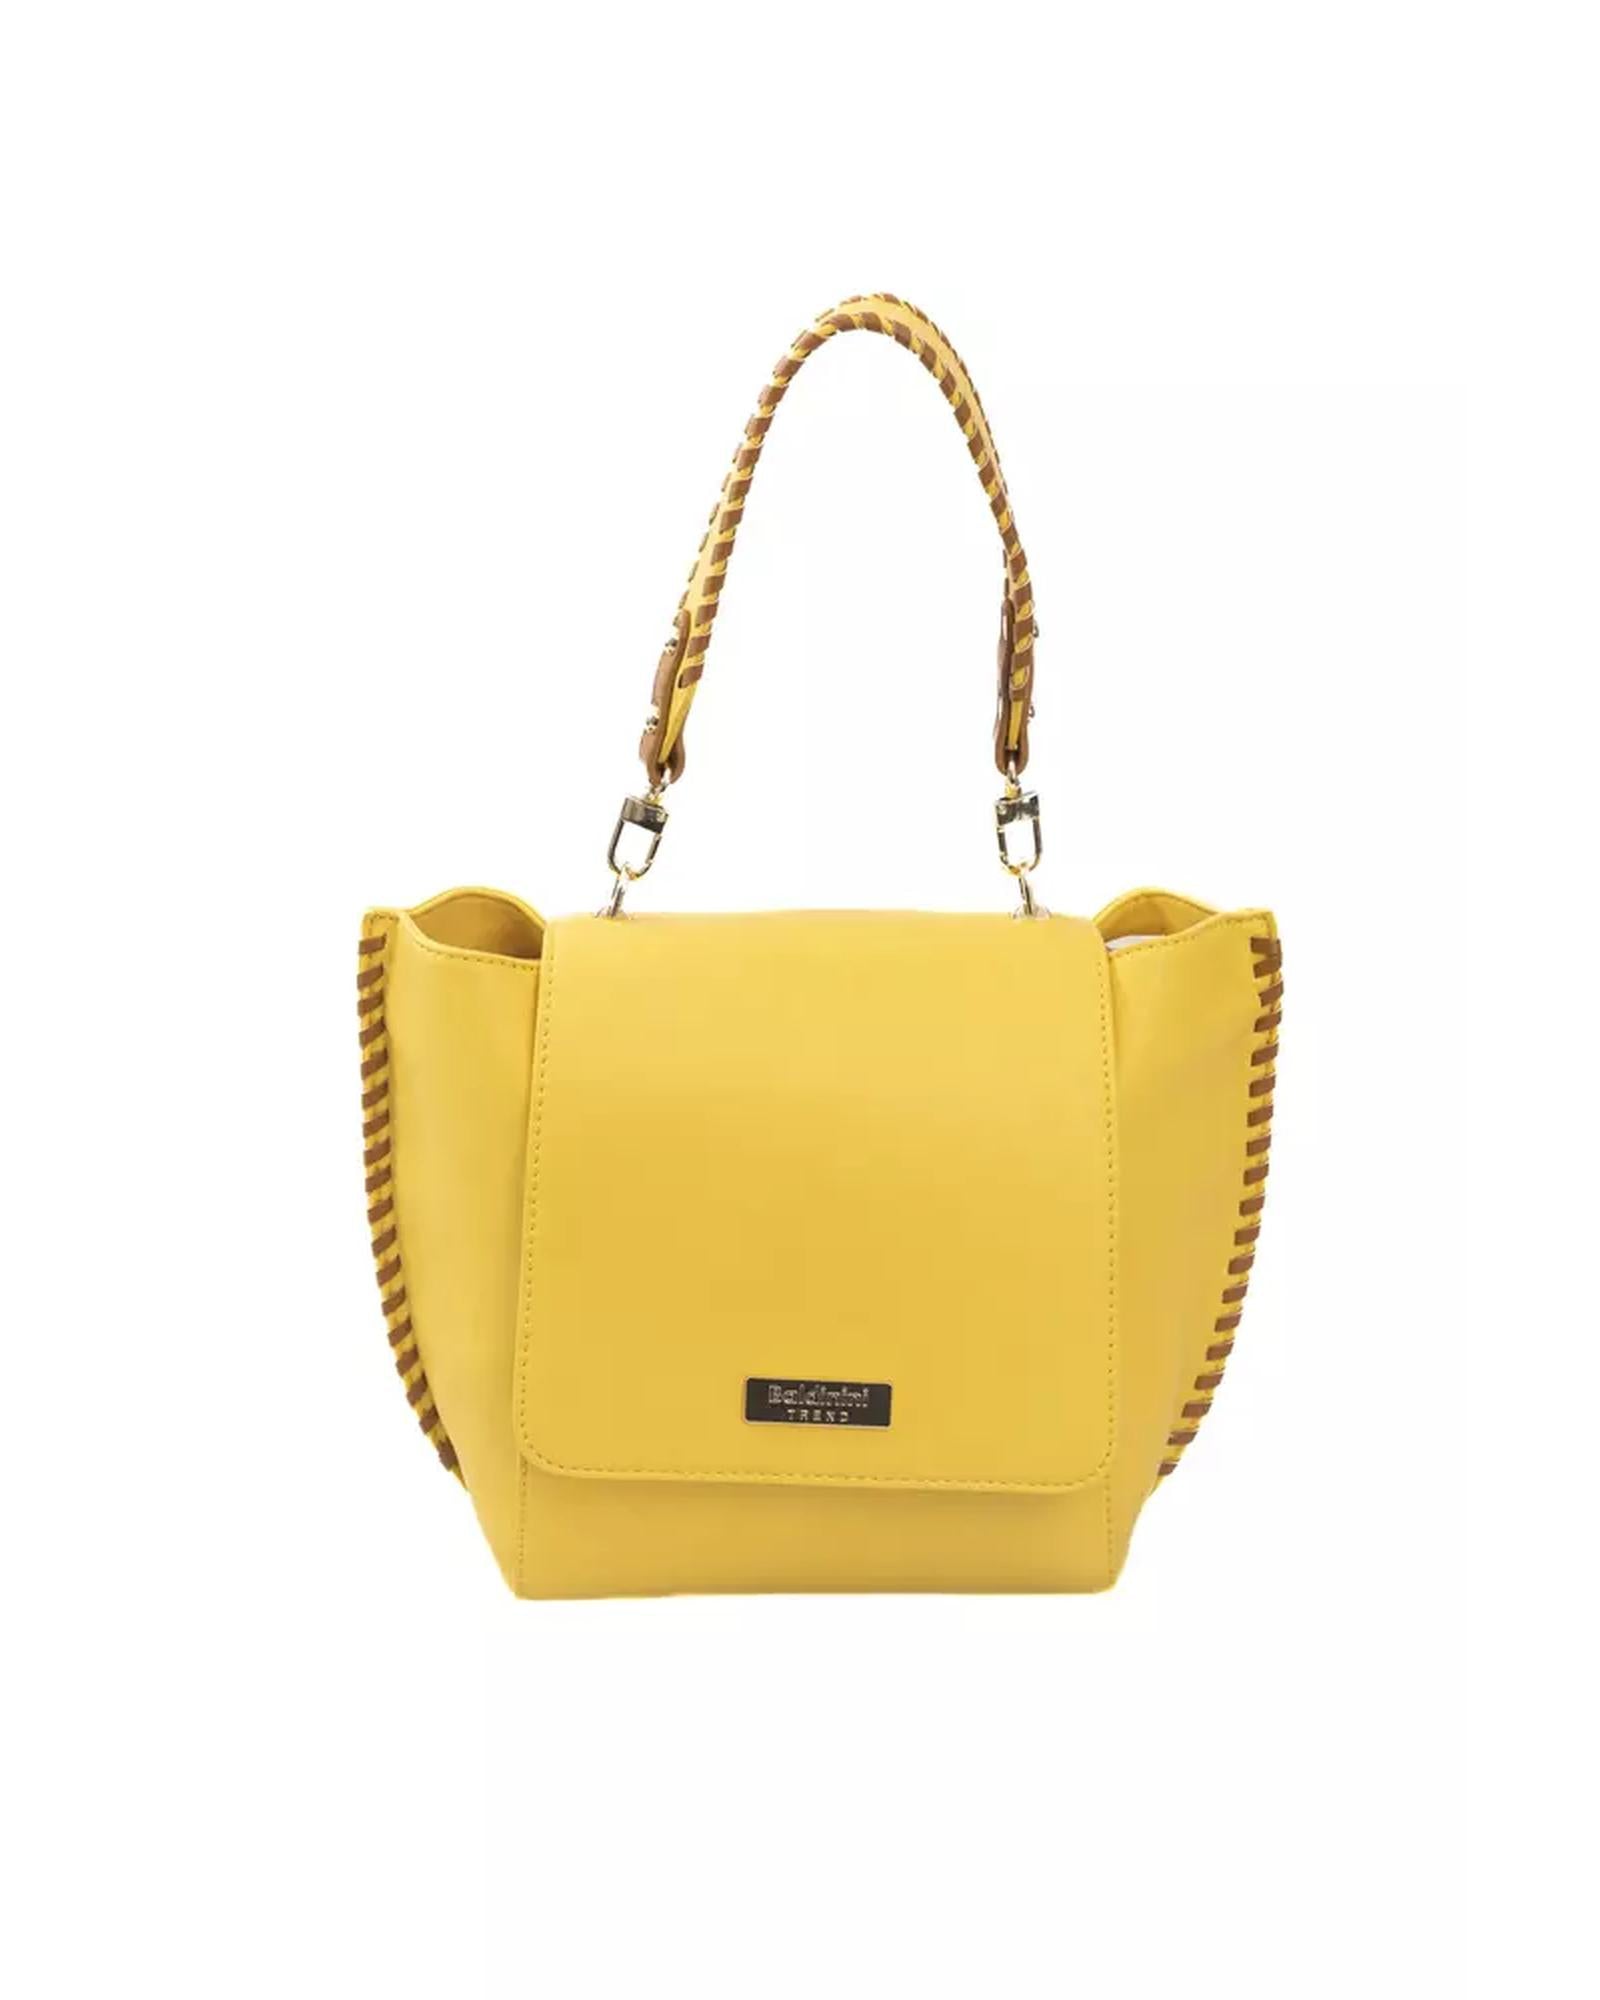 Golden Logo Flap Shoulder Bag with Internal Compartments One Size Women